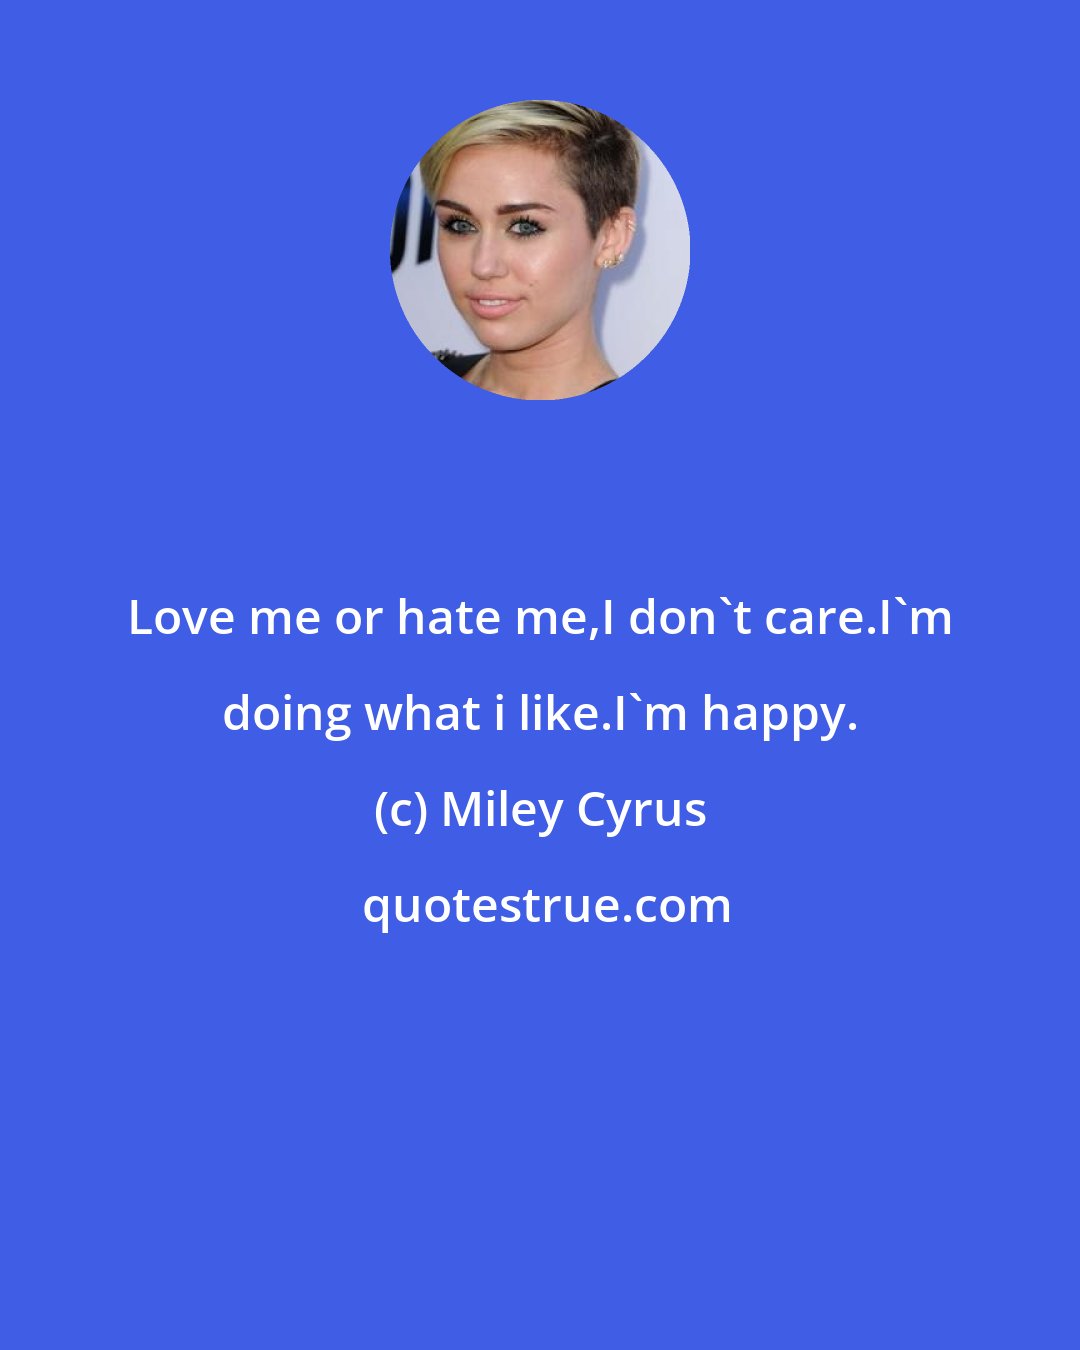 Miley Cyrus: Love me or hate me,I don't care.I'm doing what i like.I'm happy.